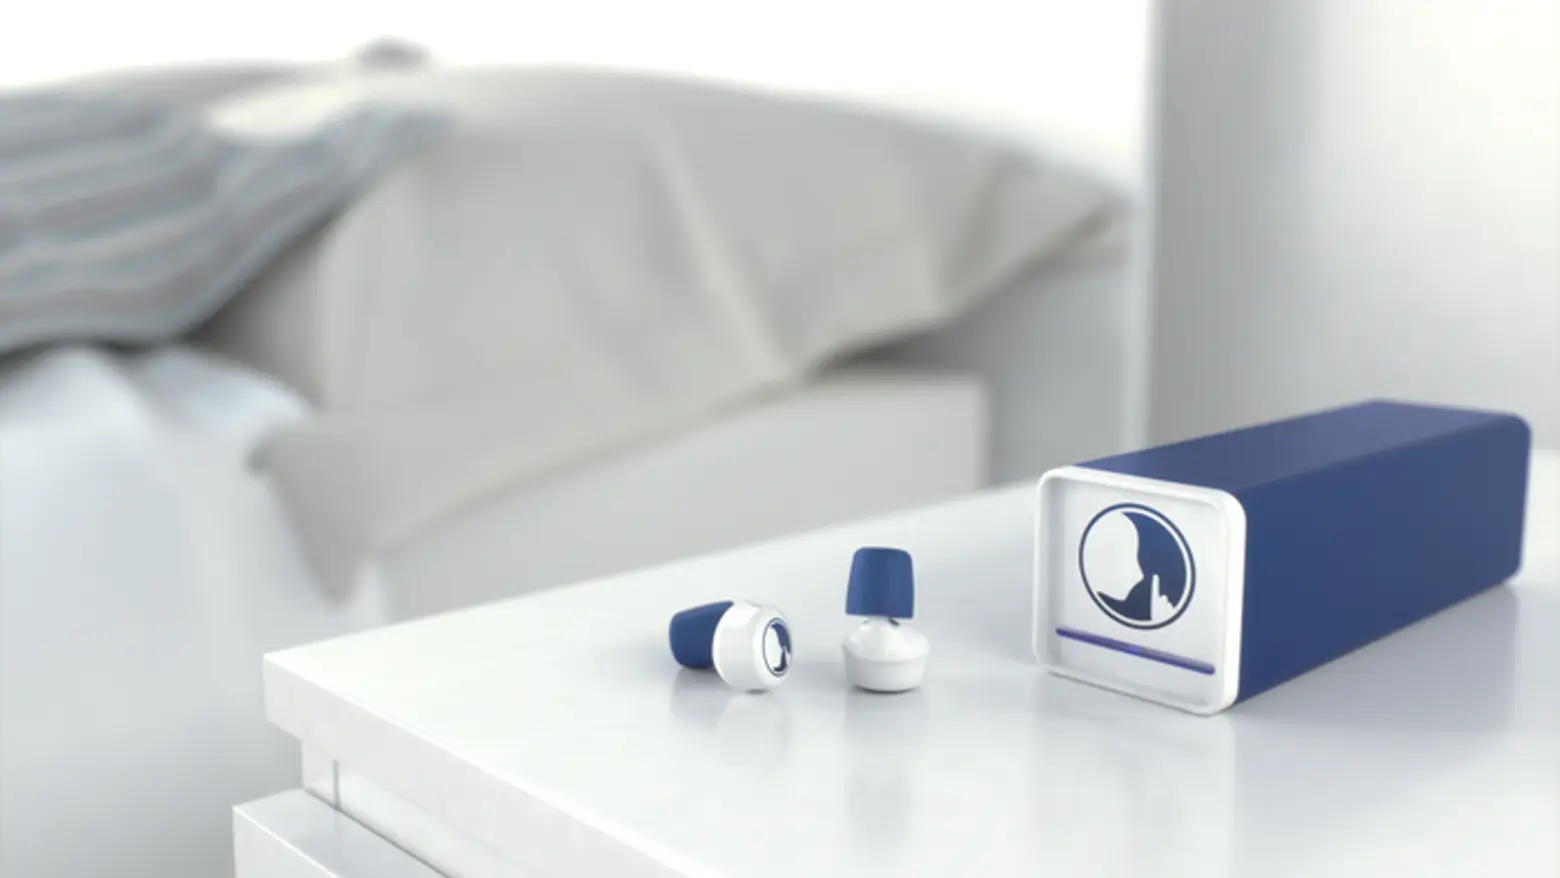 Hush Earplugs Let You Block Out Noise Without Missing Your Alarm